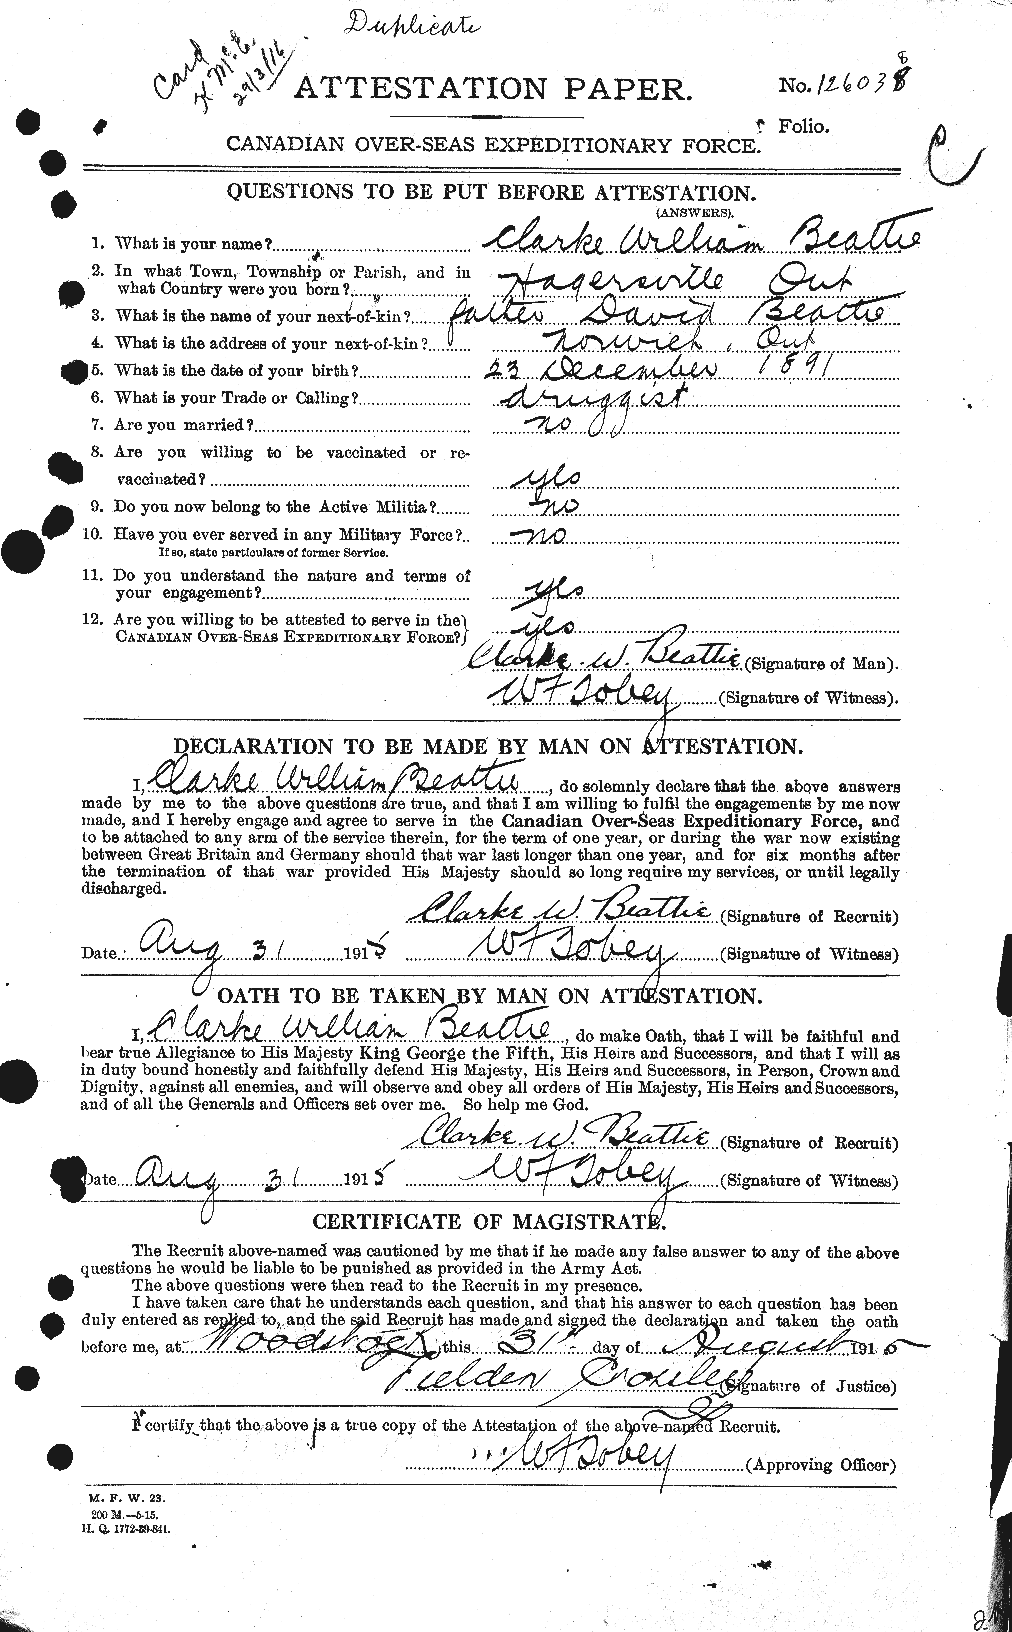 Personnel Records of the First World War - CEF 230665a